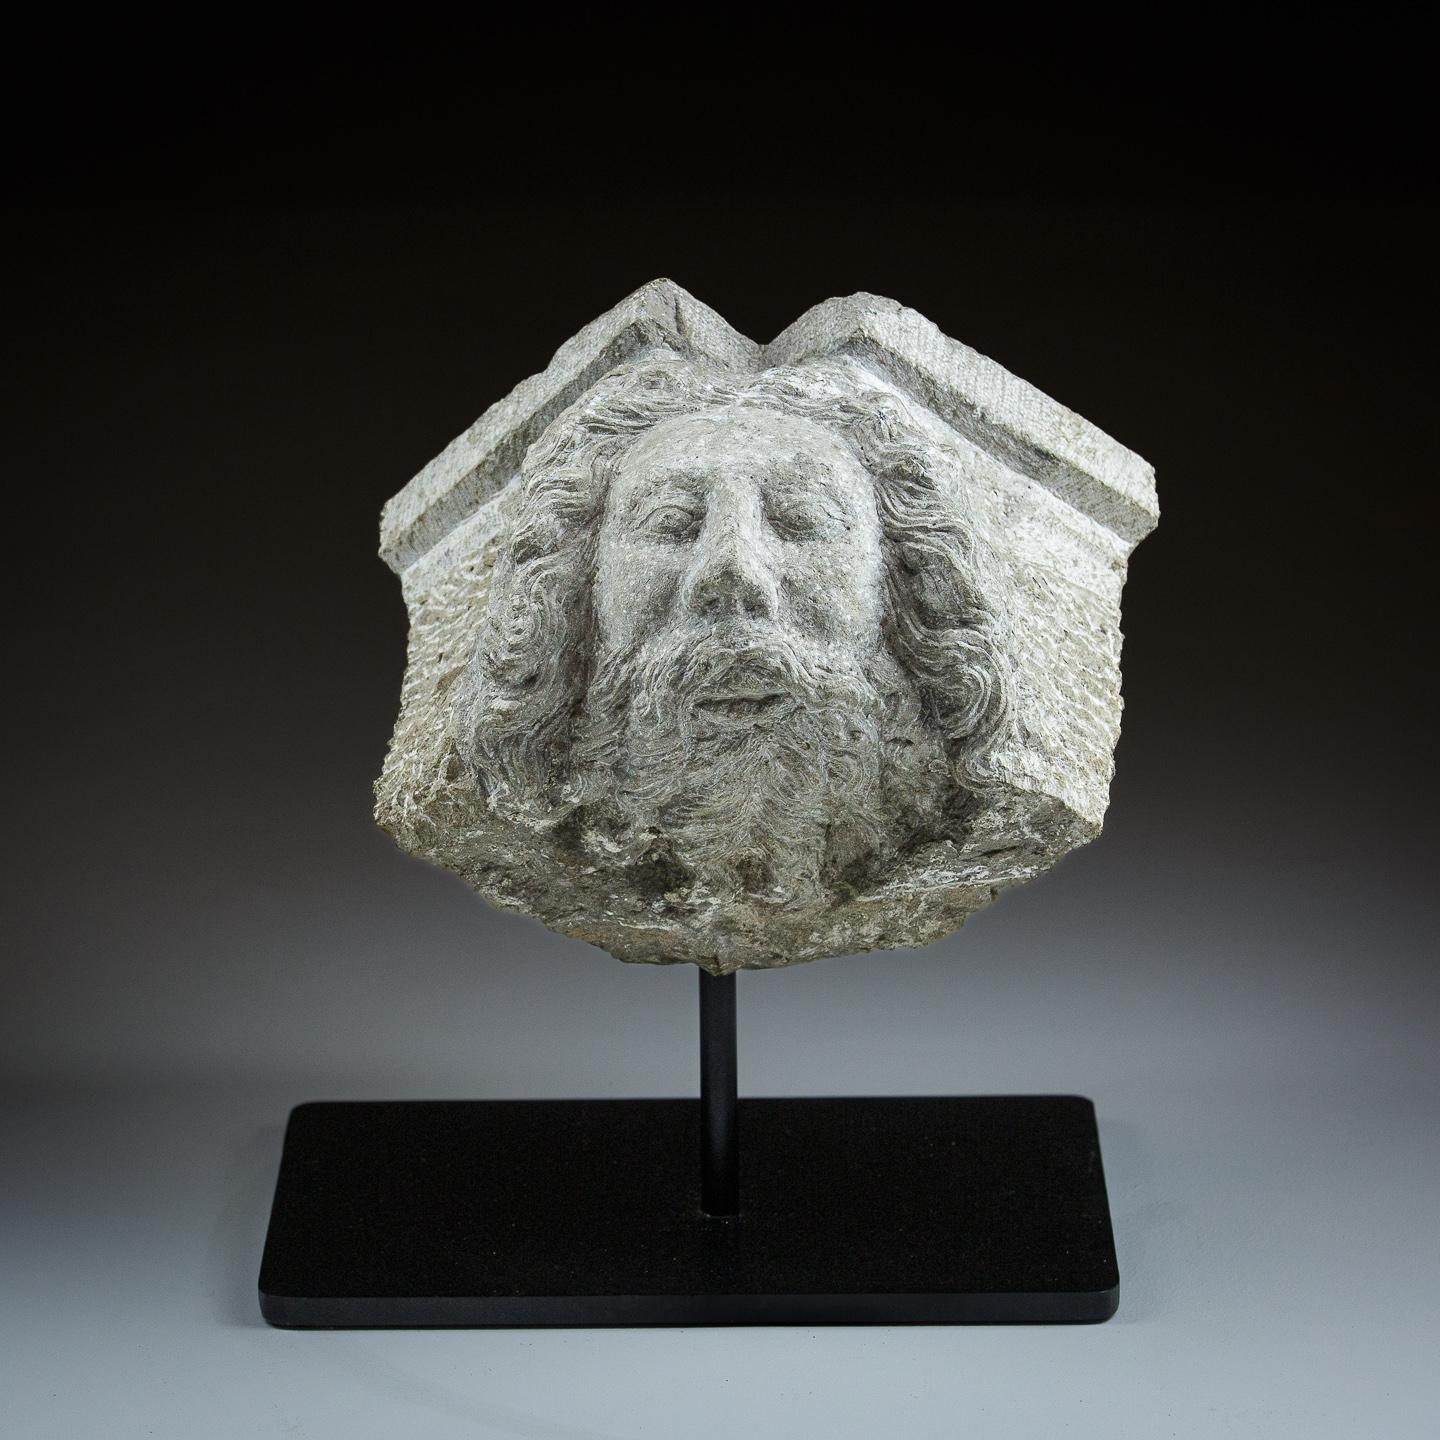 Carved Stone Head, depicting bearded figure with flowing hair. Possibly Neptune. Large Building pediment fragment. France Circa 19th Century. Measurement for fragment itself not including stand.